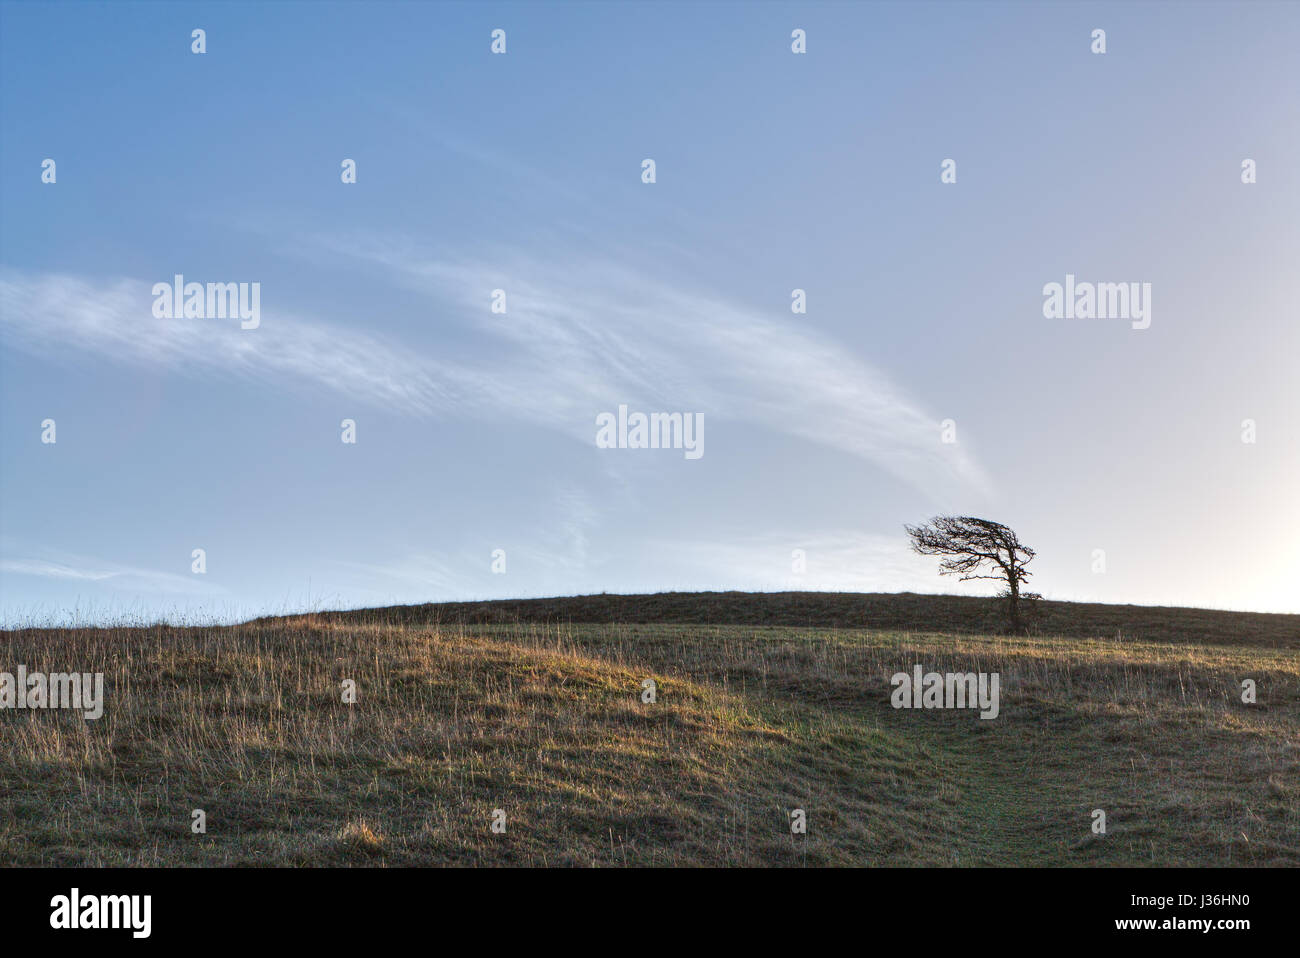 A solitary hilltop tree on the horizon in the distance bent by the wind with cloud patterns appearing to rise like smoke from the tree. Stock Photo